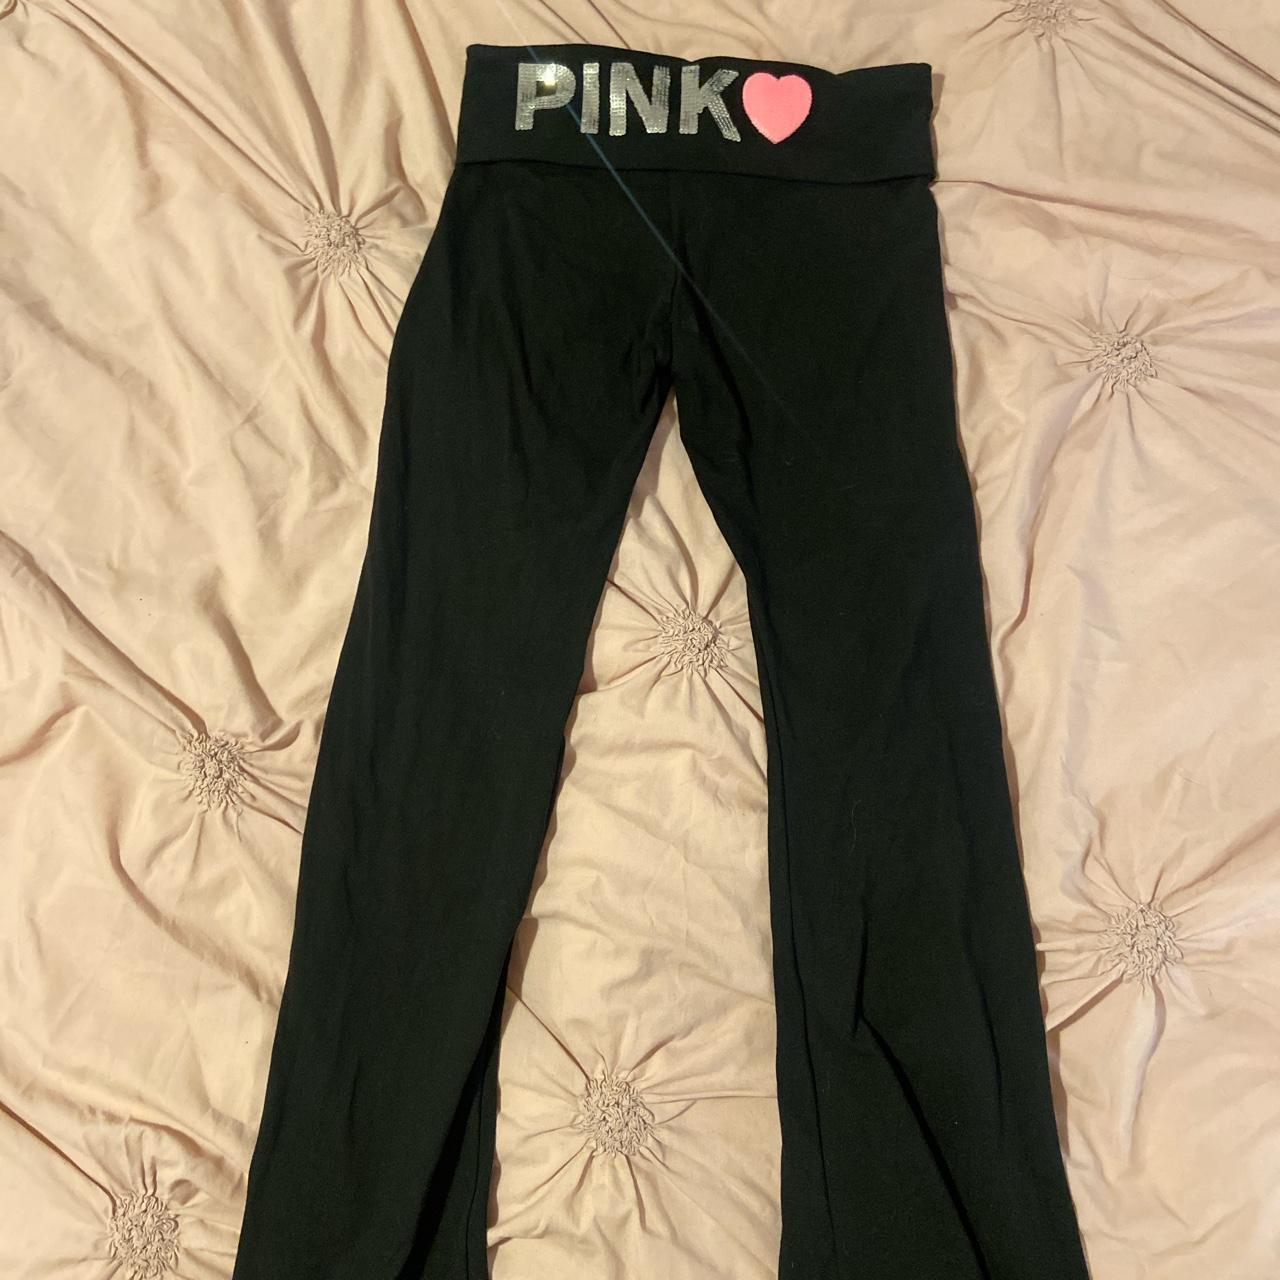 Victoria's Secret PINK fold over flare yoga pants - Depop  Victoria  secret pink yoga pants, Fold over yoga pants, Outfits with leggings